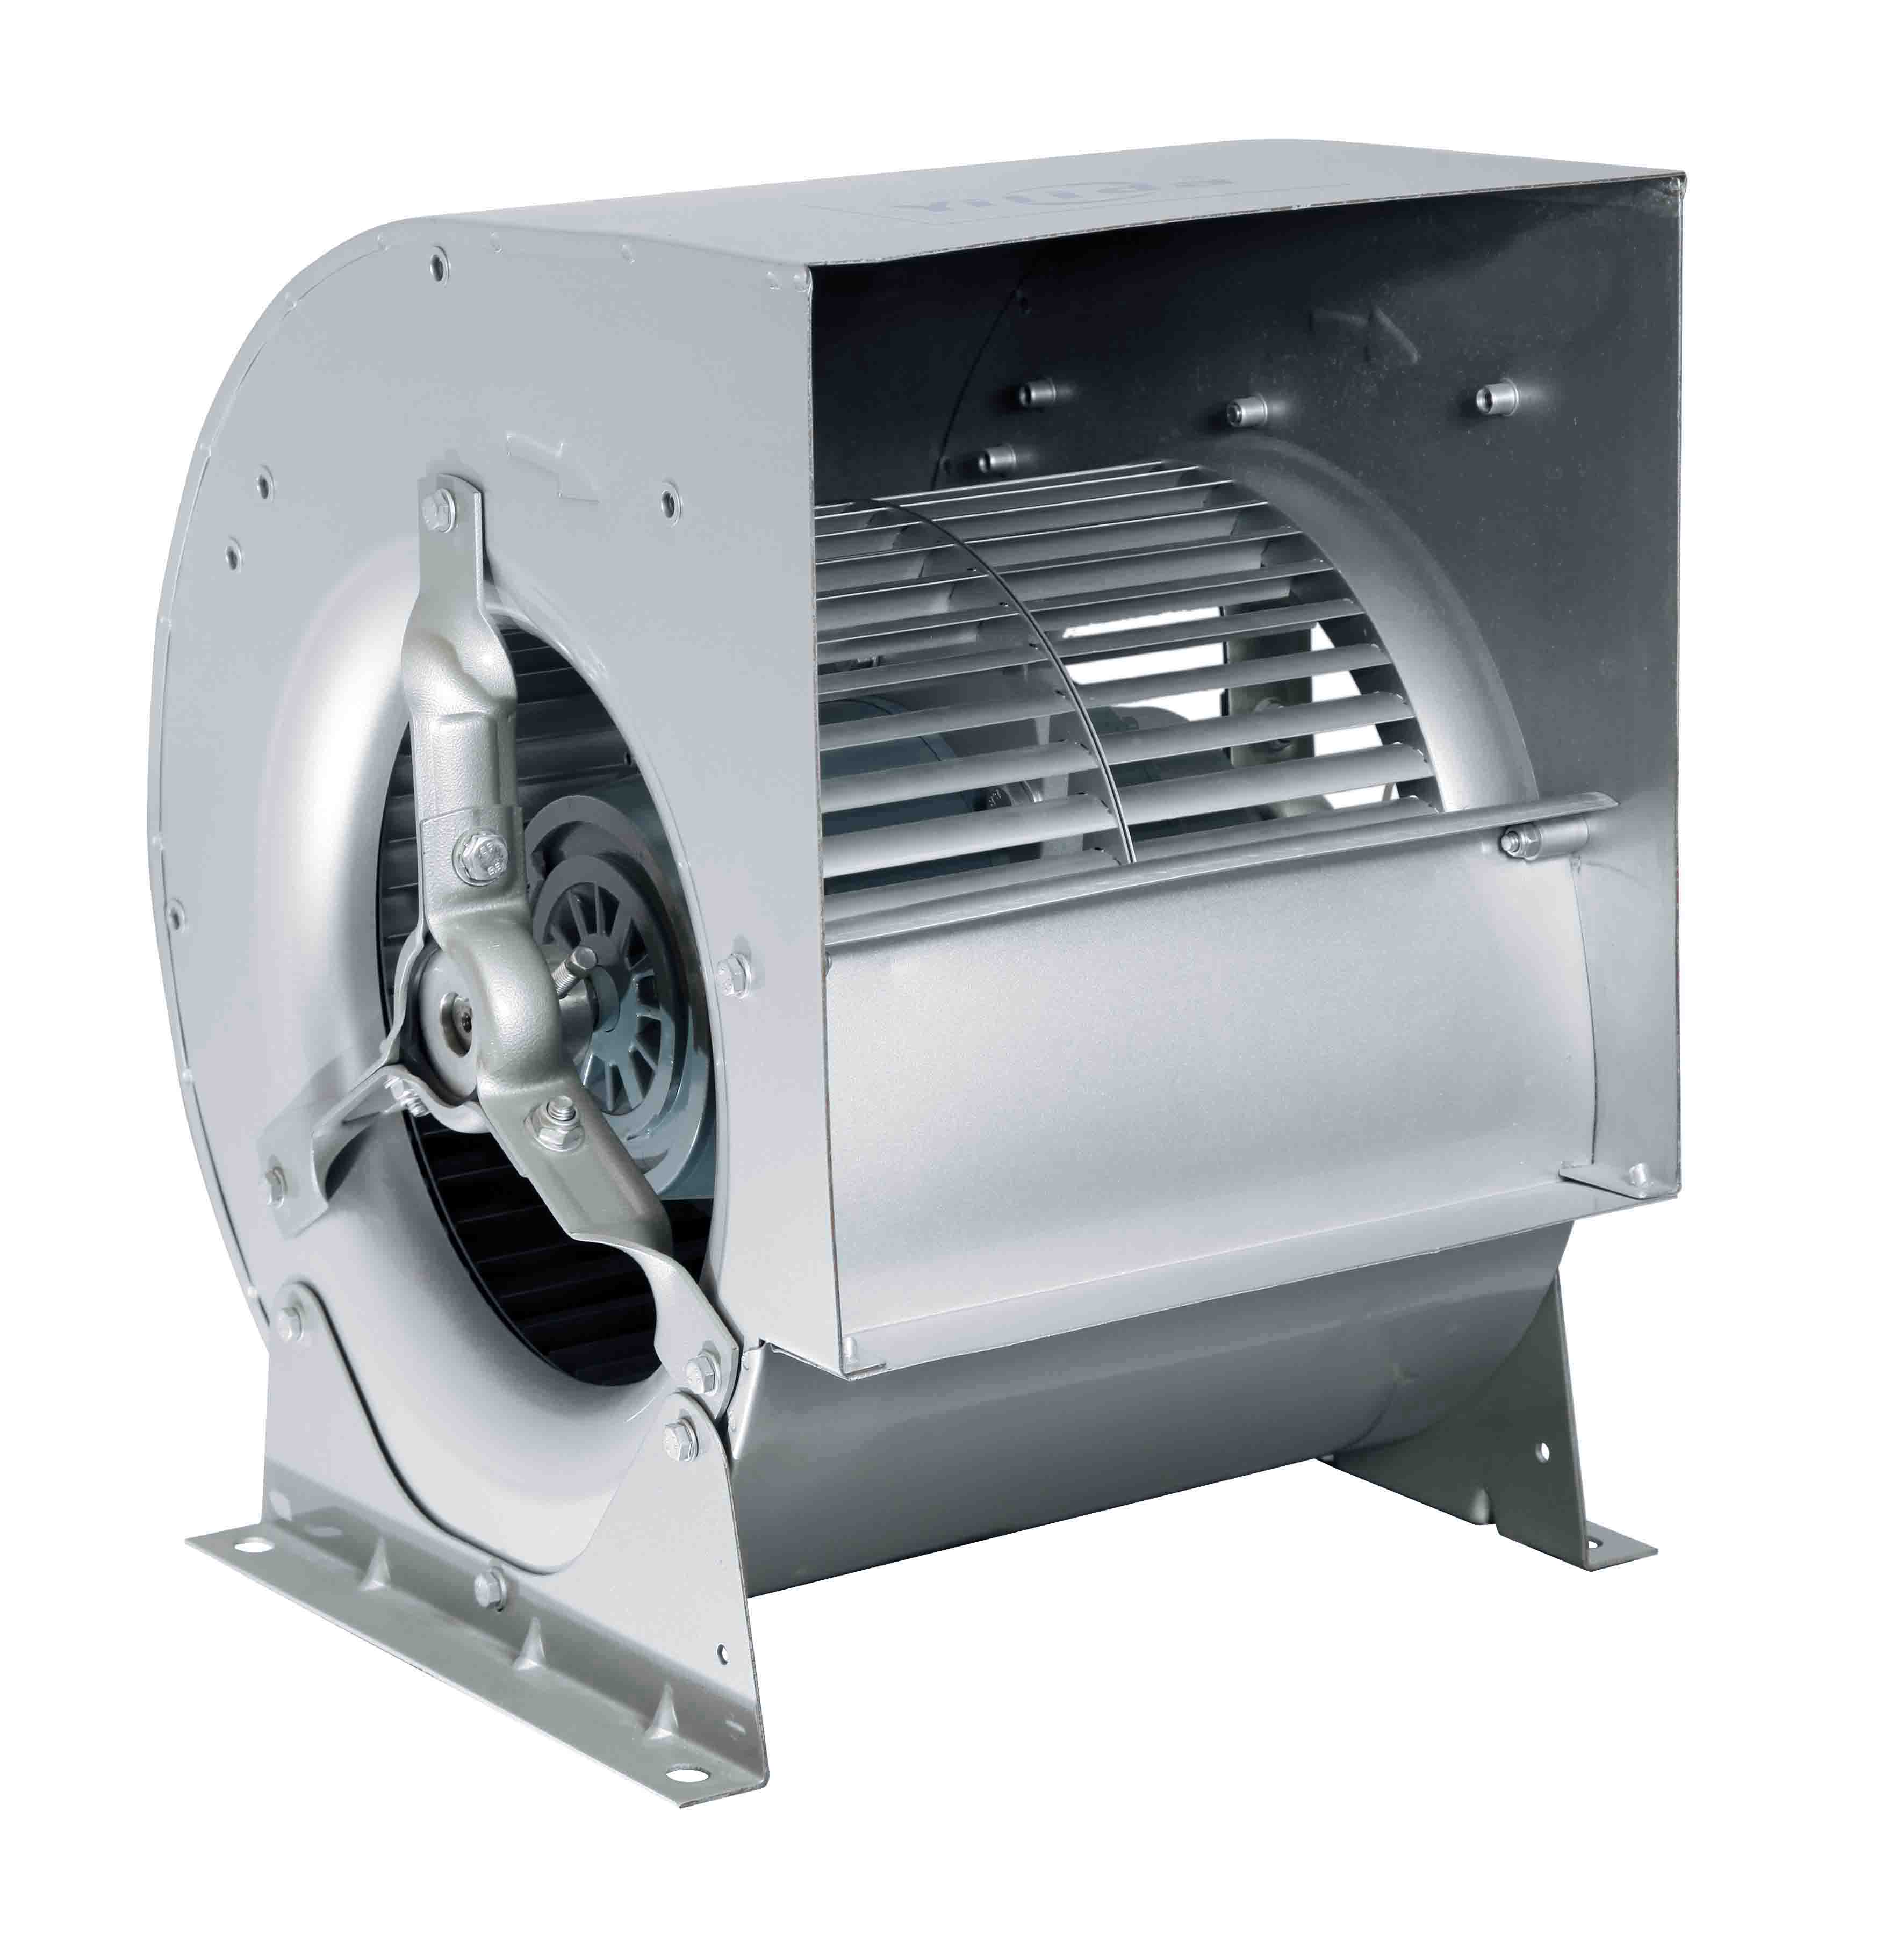 Ventilation System Industrial Air Blower Cooling Centrifugal Fan